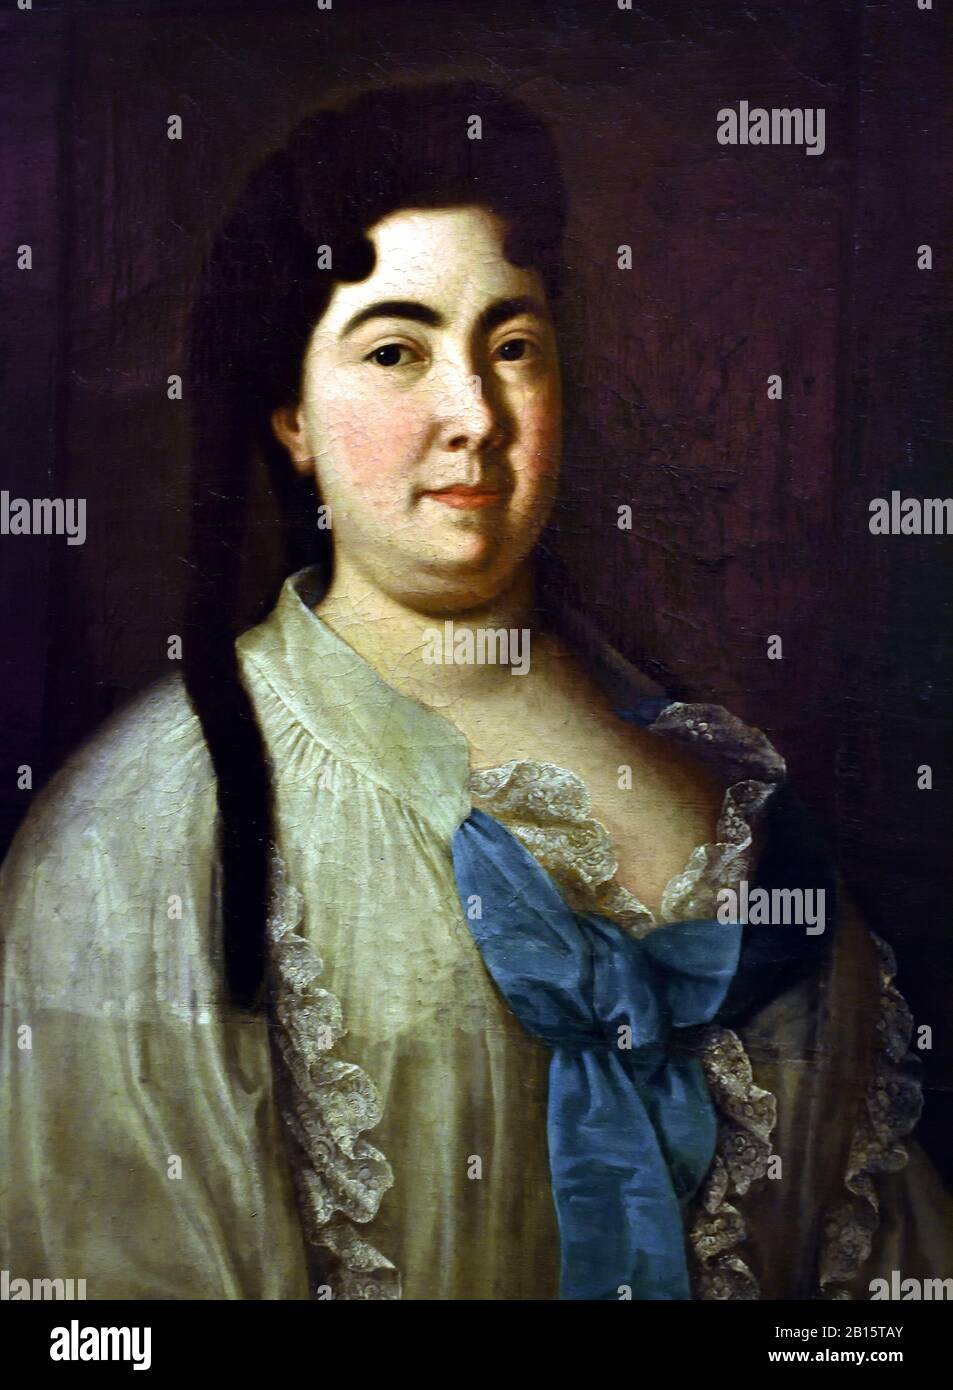 Catherine I ( In a Peignoir )1684 – 1727  was the second wife of Peter the Great and Empress of Russia from 1725 until her death. by Louis Caravaque (1684-1754) French portrait painter worked in Russia. Russia, Russian, Federation, Stock Photo